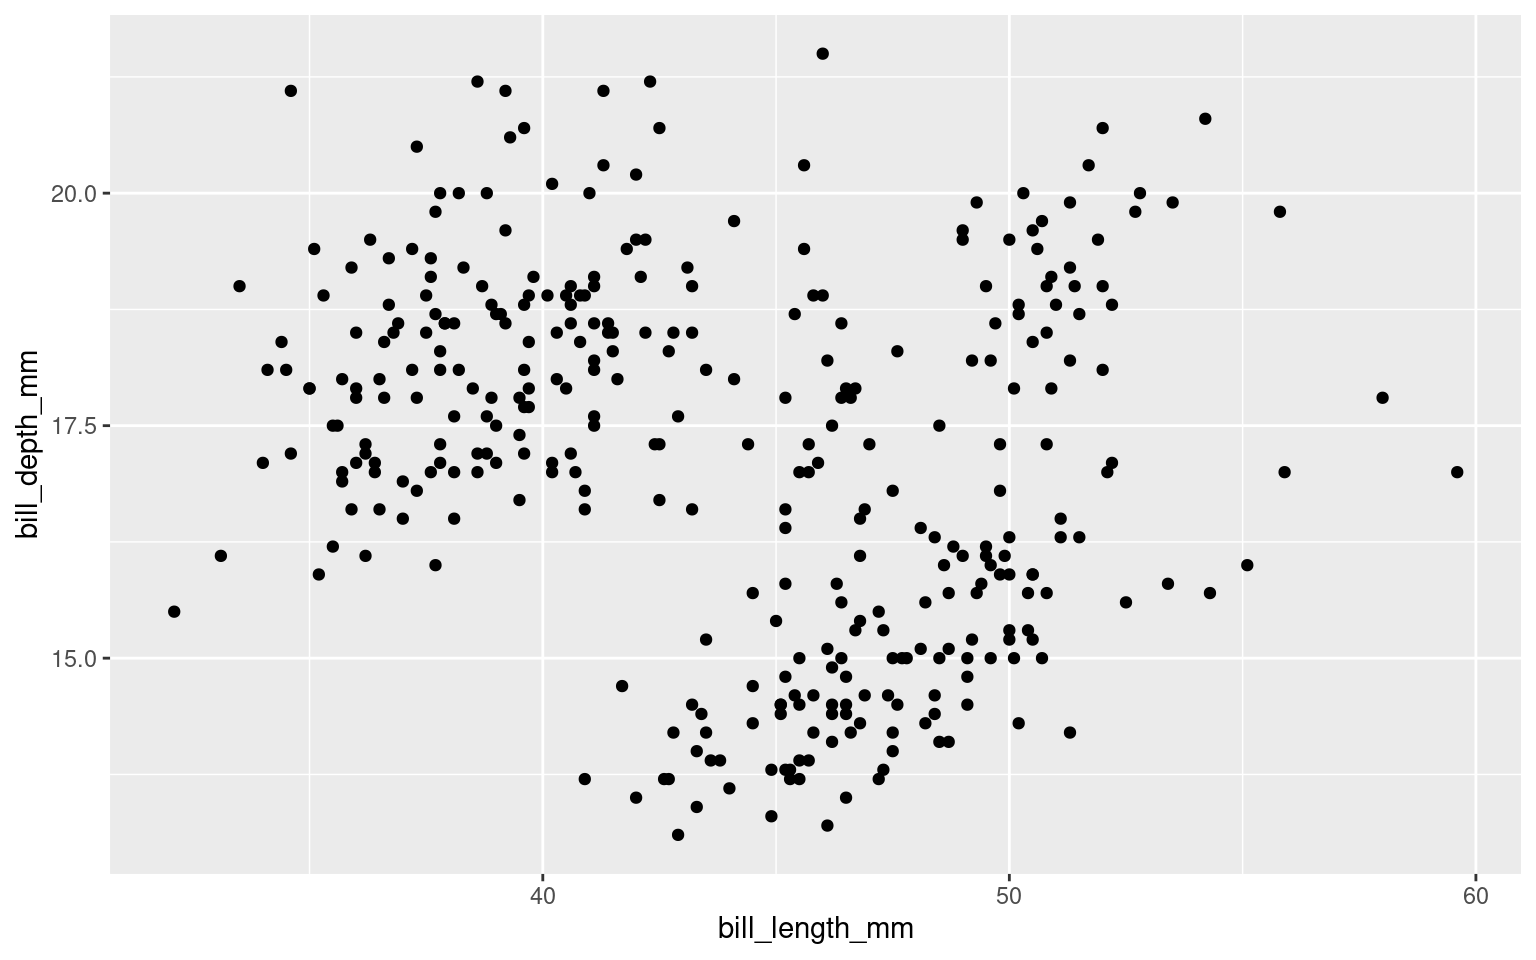 This is a scatterplot